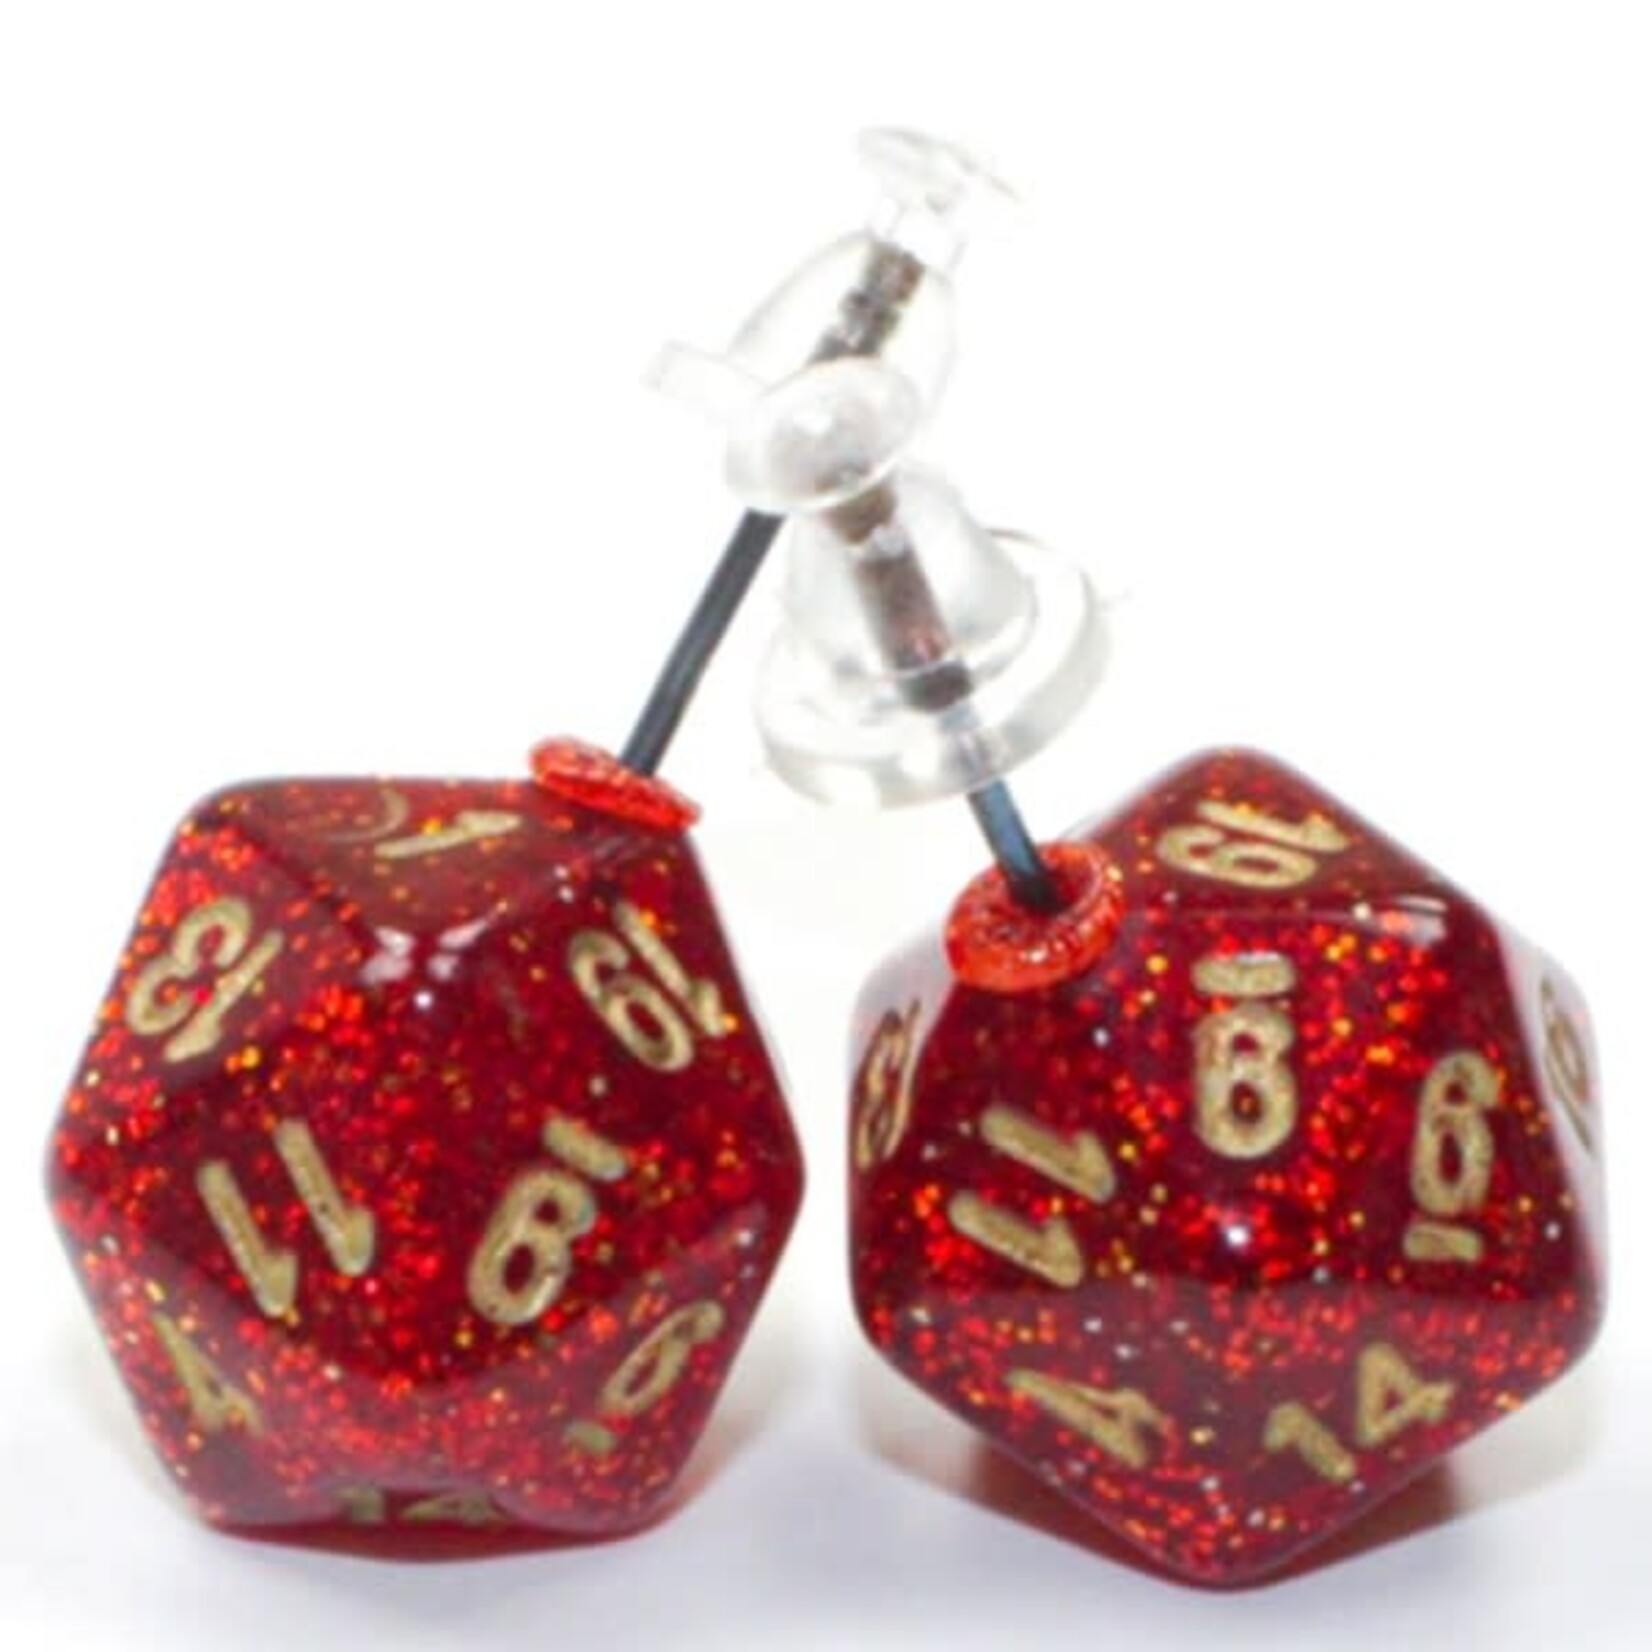 Chessex Mini D20 Stud Earrings: Glitter Ruby with gold